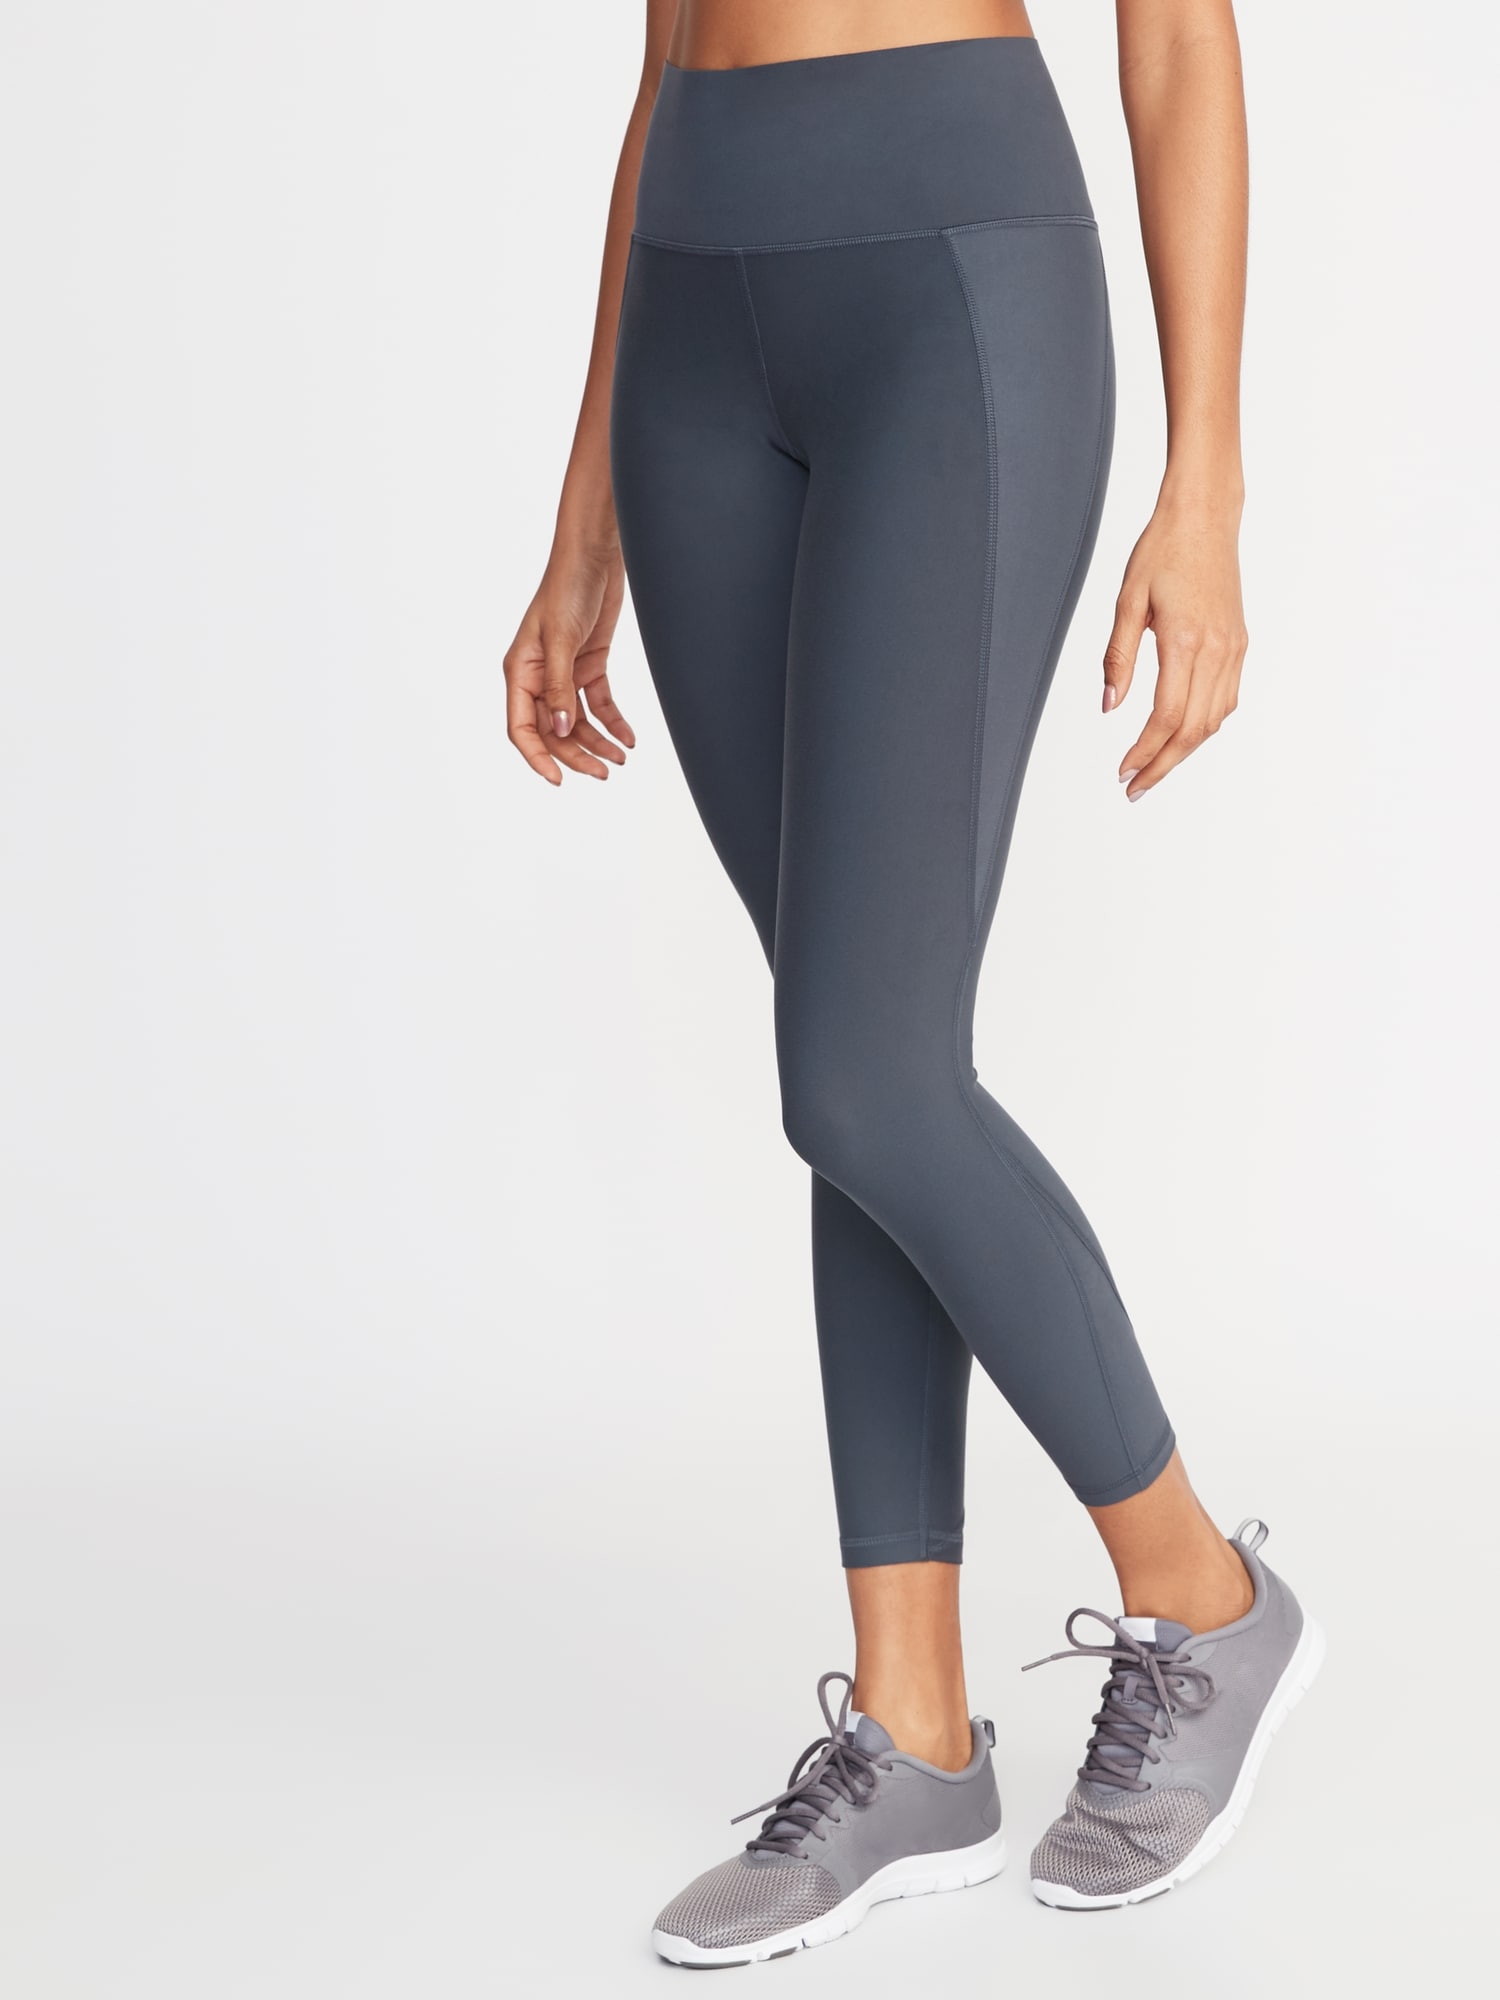 Old Navy Powerpress Leggings Reviewed  International Society of Precision  Agriculture